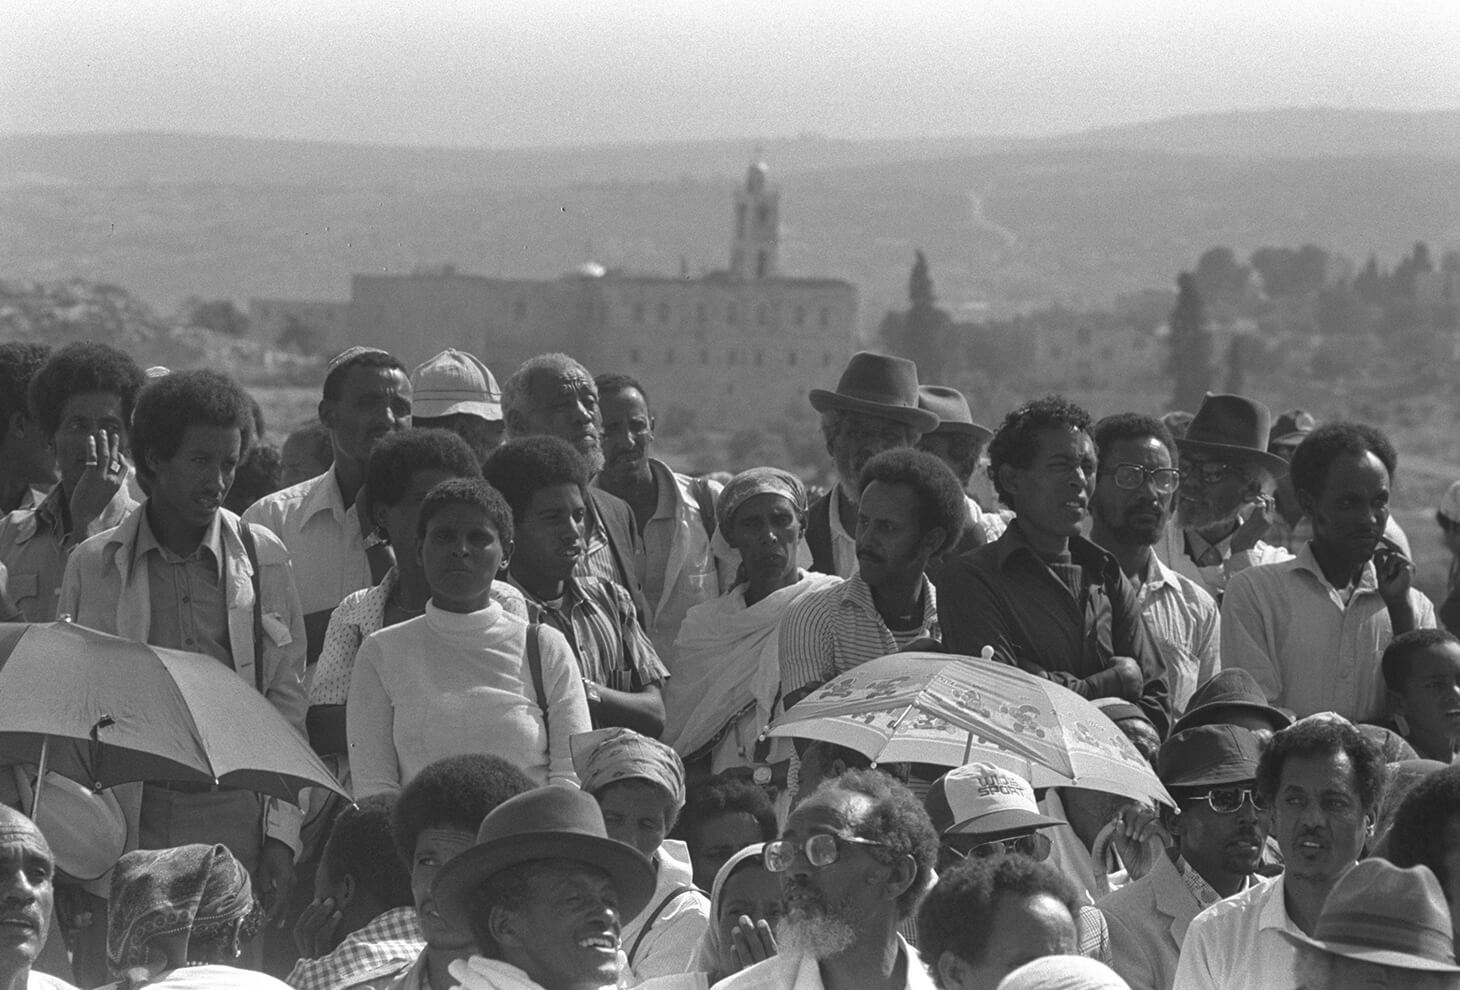 MEMBERS OF ETHIOPIAN COMMUNITY LISTENING TO AN ADDRESS BY ELDERS DURING TREE-PLANTING CEREMONY FOR THEIR BROTHERS WHO DIED EN ROUTE TO ISRAEL, RAMAT RAHEL, JERUSALEM. Photo by: Nati Hernik, GPO